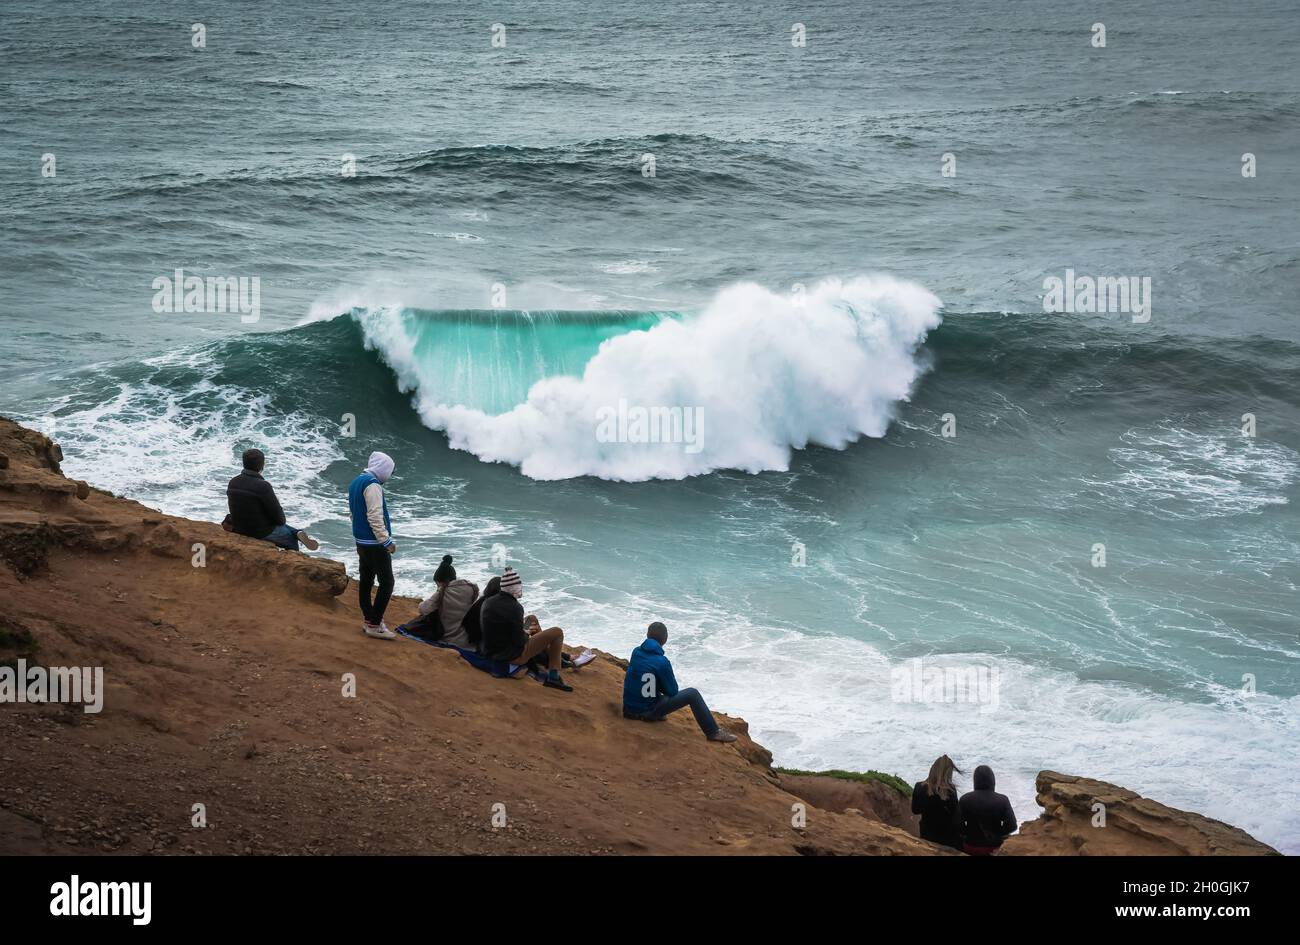 People Watching the Big Waves in Nazare - Nazare, Portugal Stock Photo